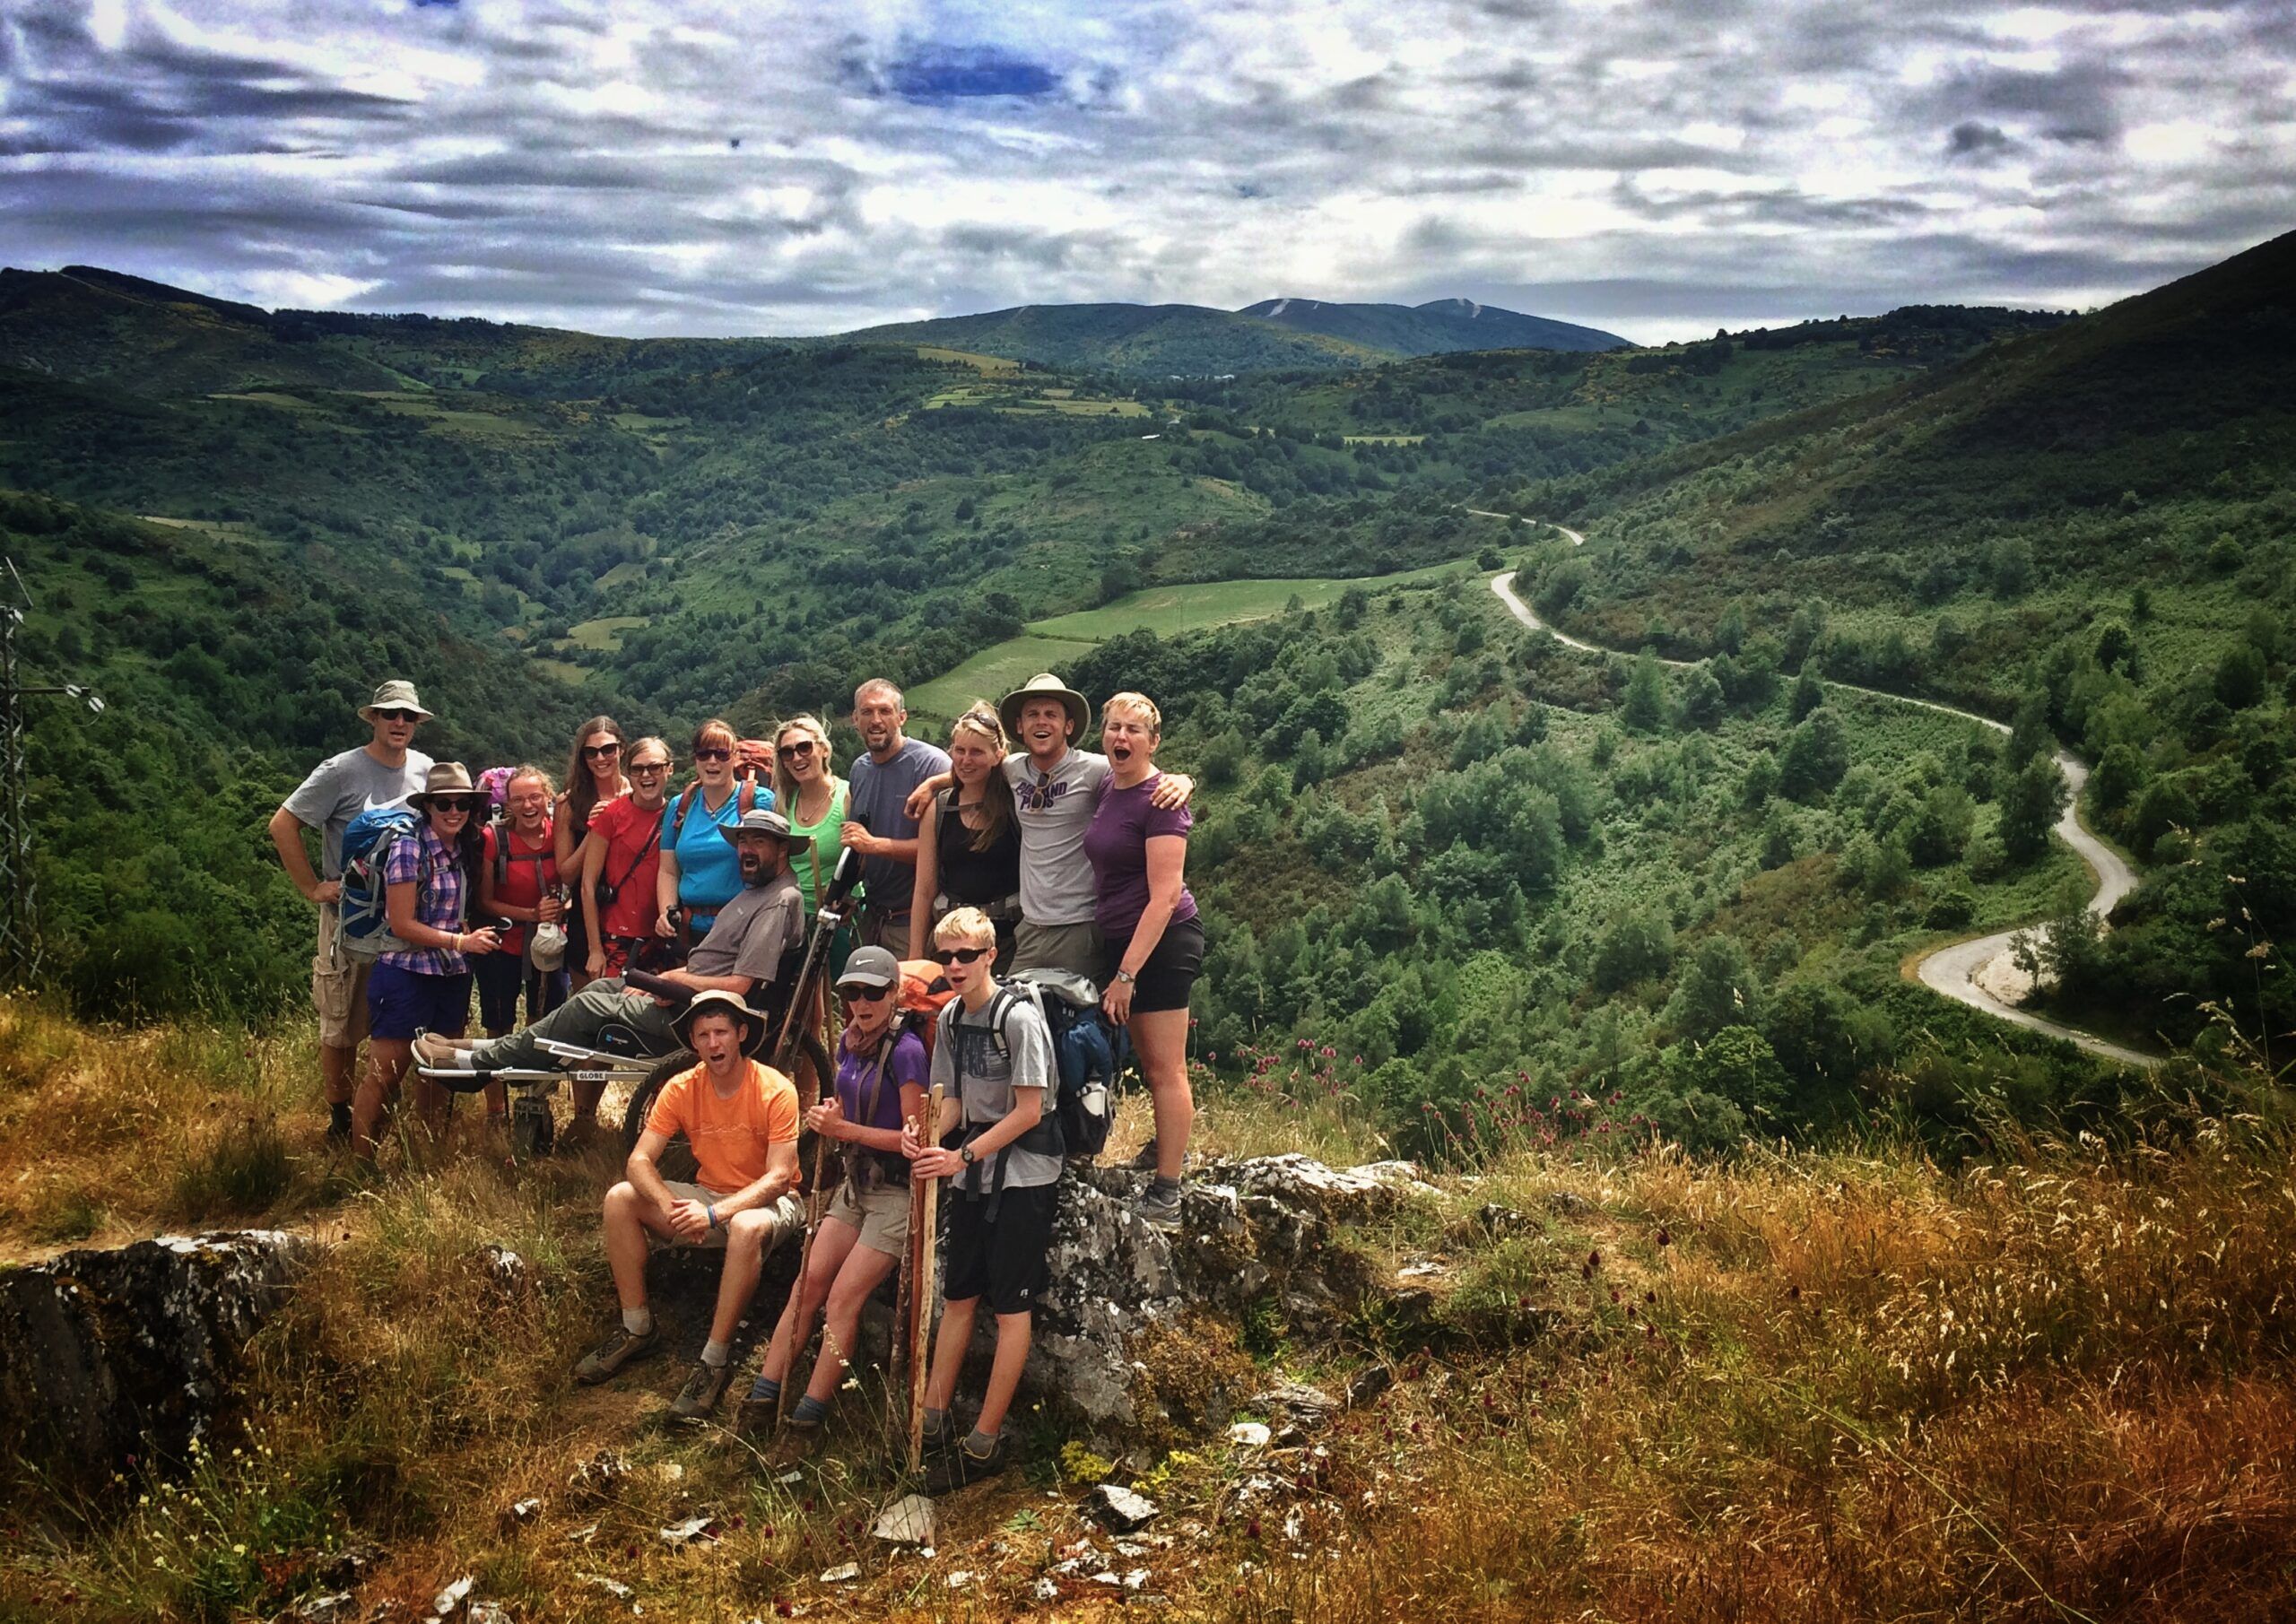 Patrick Gray and Justin Skeesuck along with friends they met on the Camino